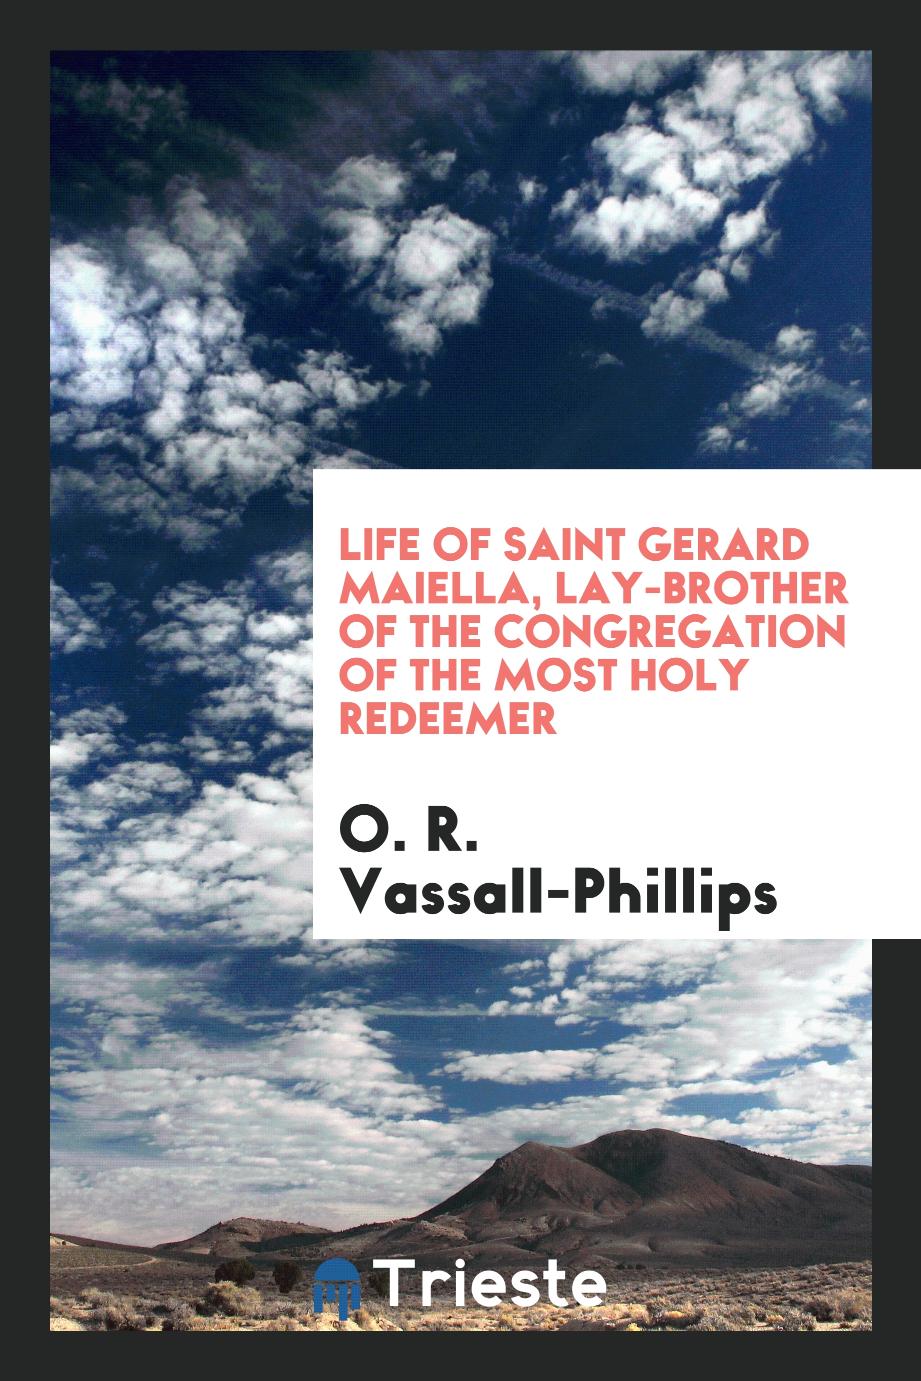 Life of Saint Gerard Maiella, lay-brother of the Congregation of the Most Holy Redeemer